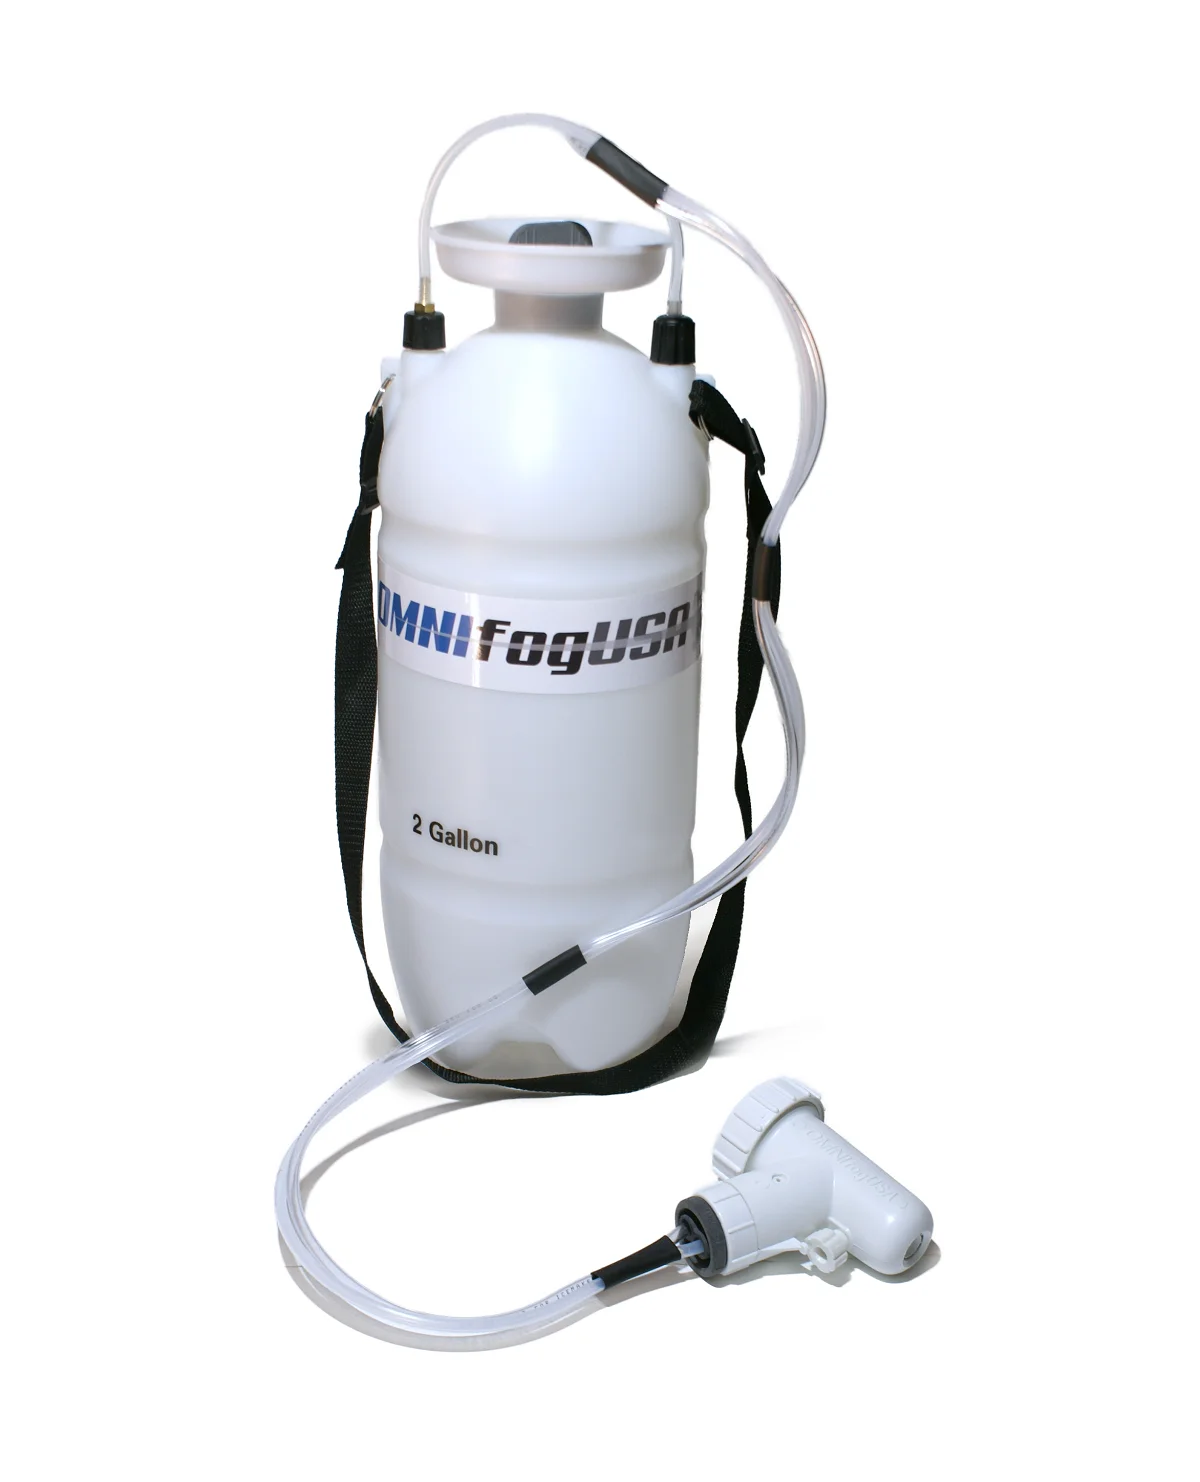 OmnifogUSA 2 Gallon Large Capacity Kit With Universal Blower And Designed To Spray (10000004522686)